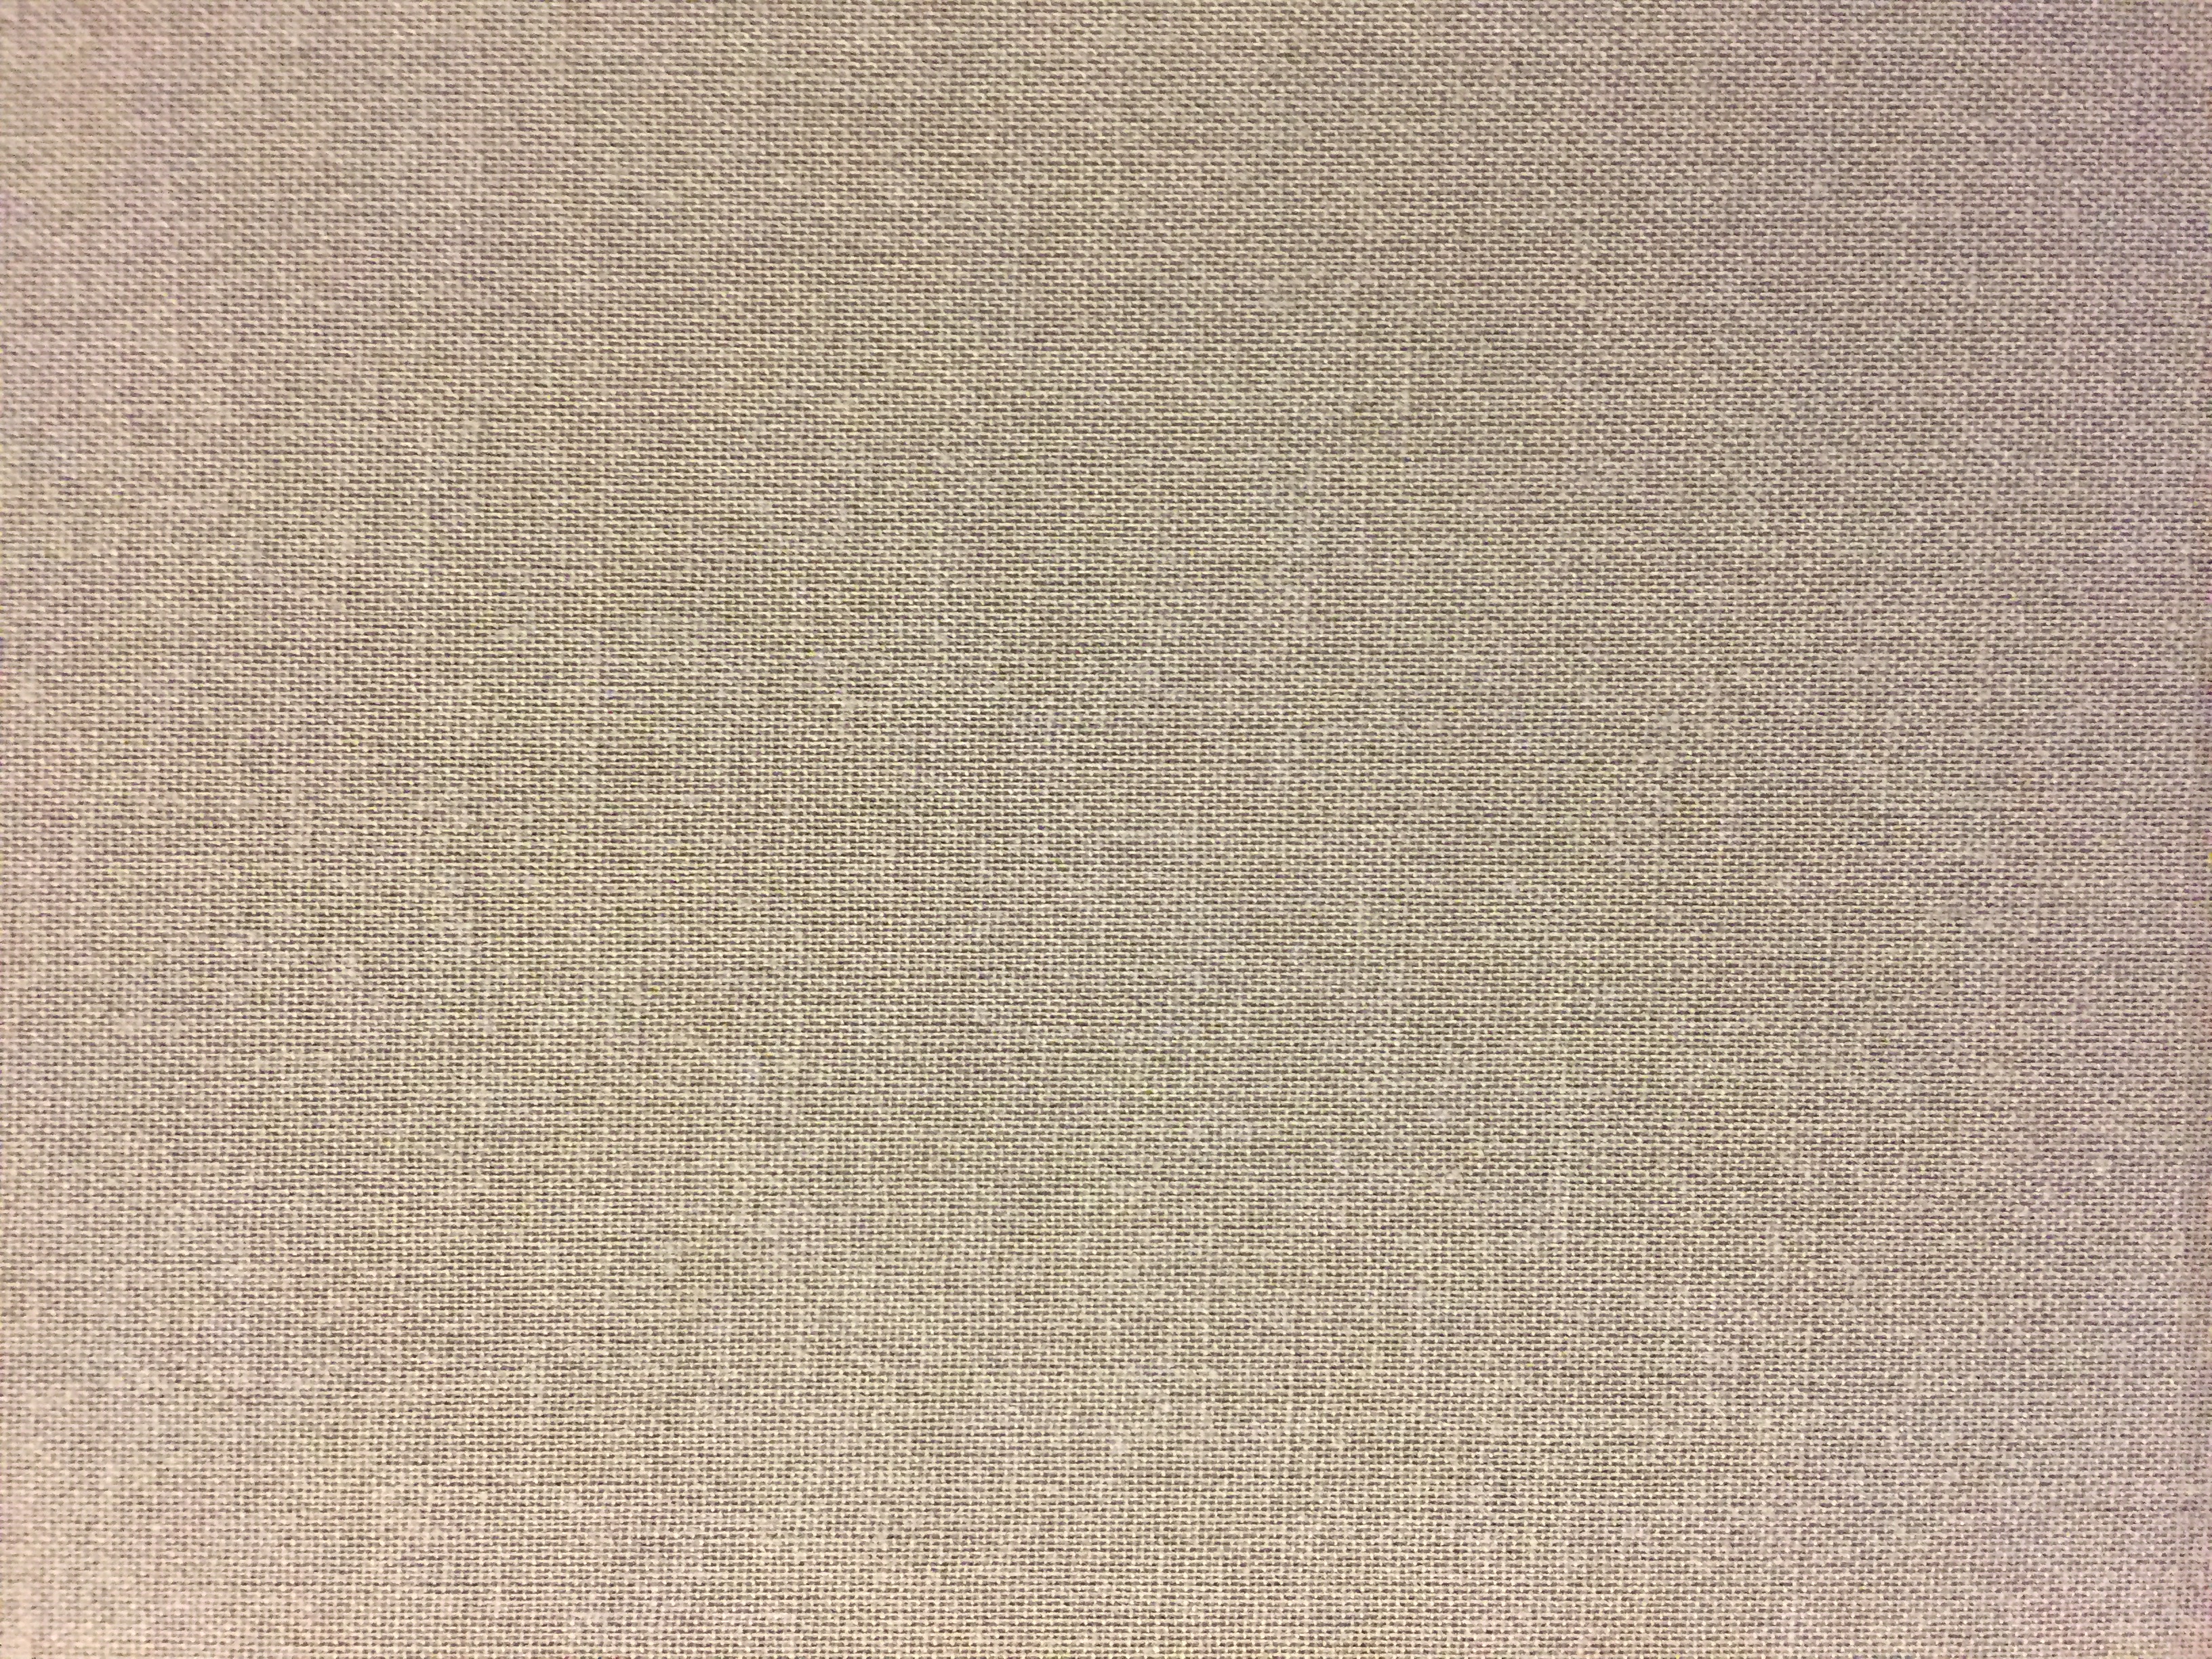 Thin light brown fabric from book cover | Free Textures